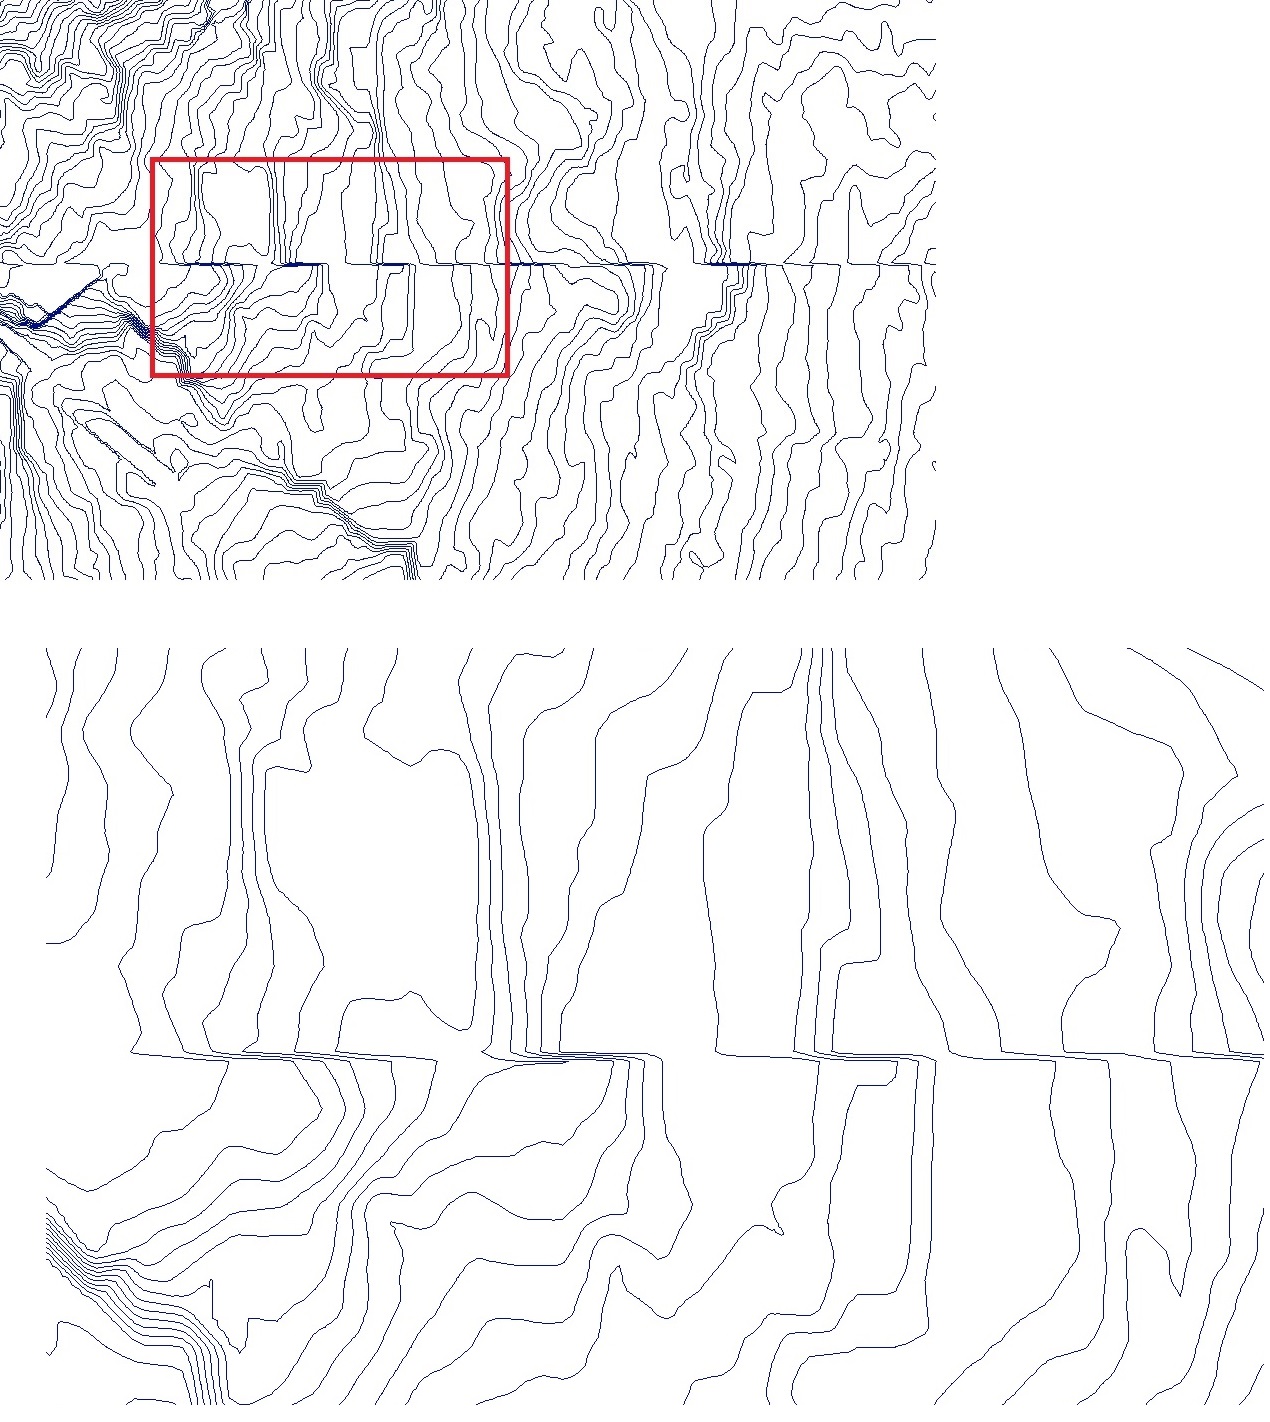 Sampel of contour lines with errors